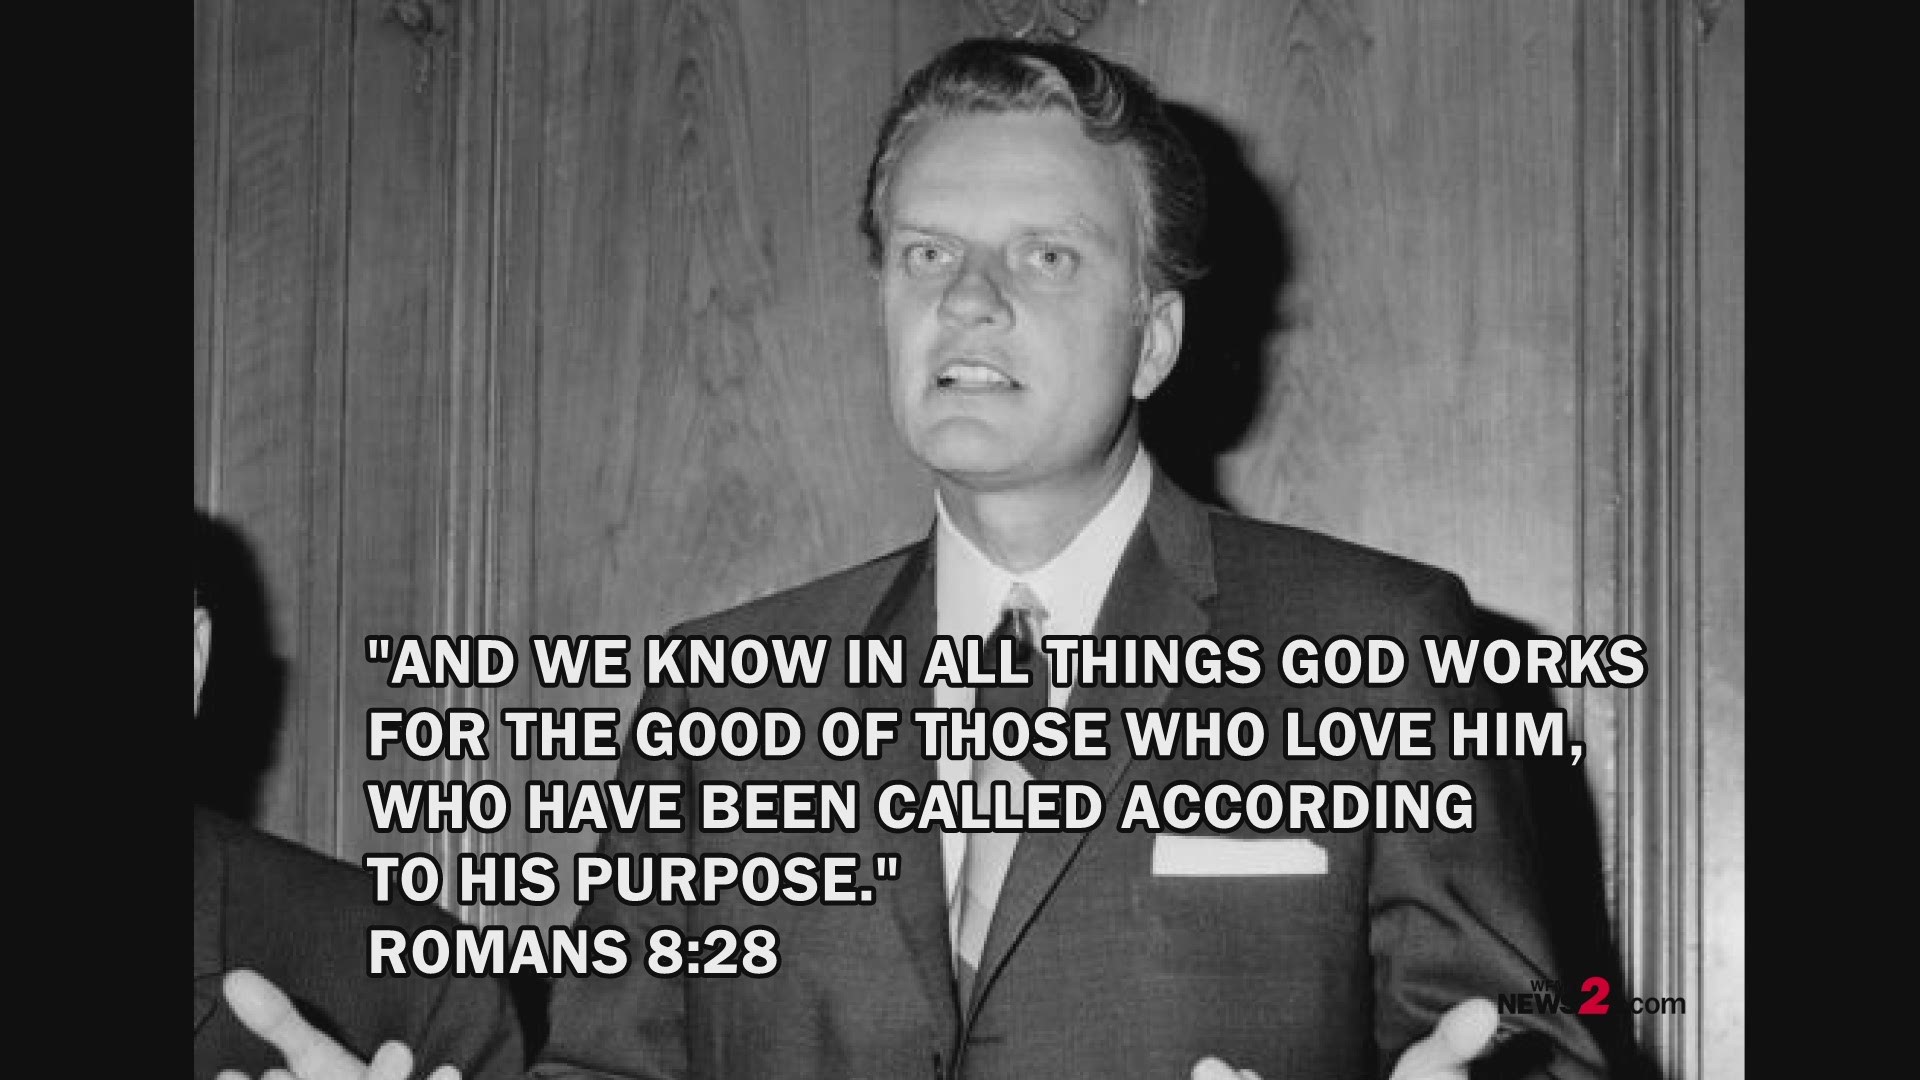 Scriptures To Hold Close To Heart After Billy Graham's Death